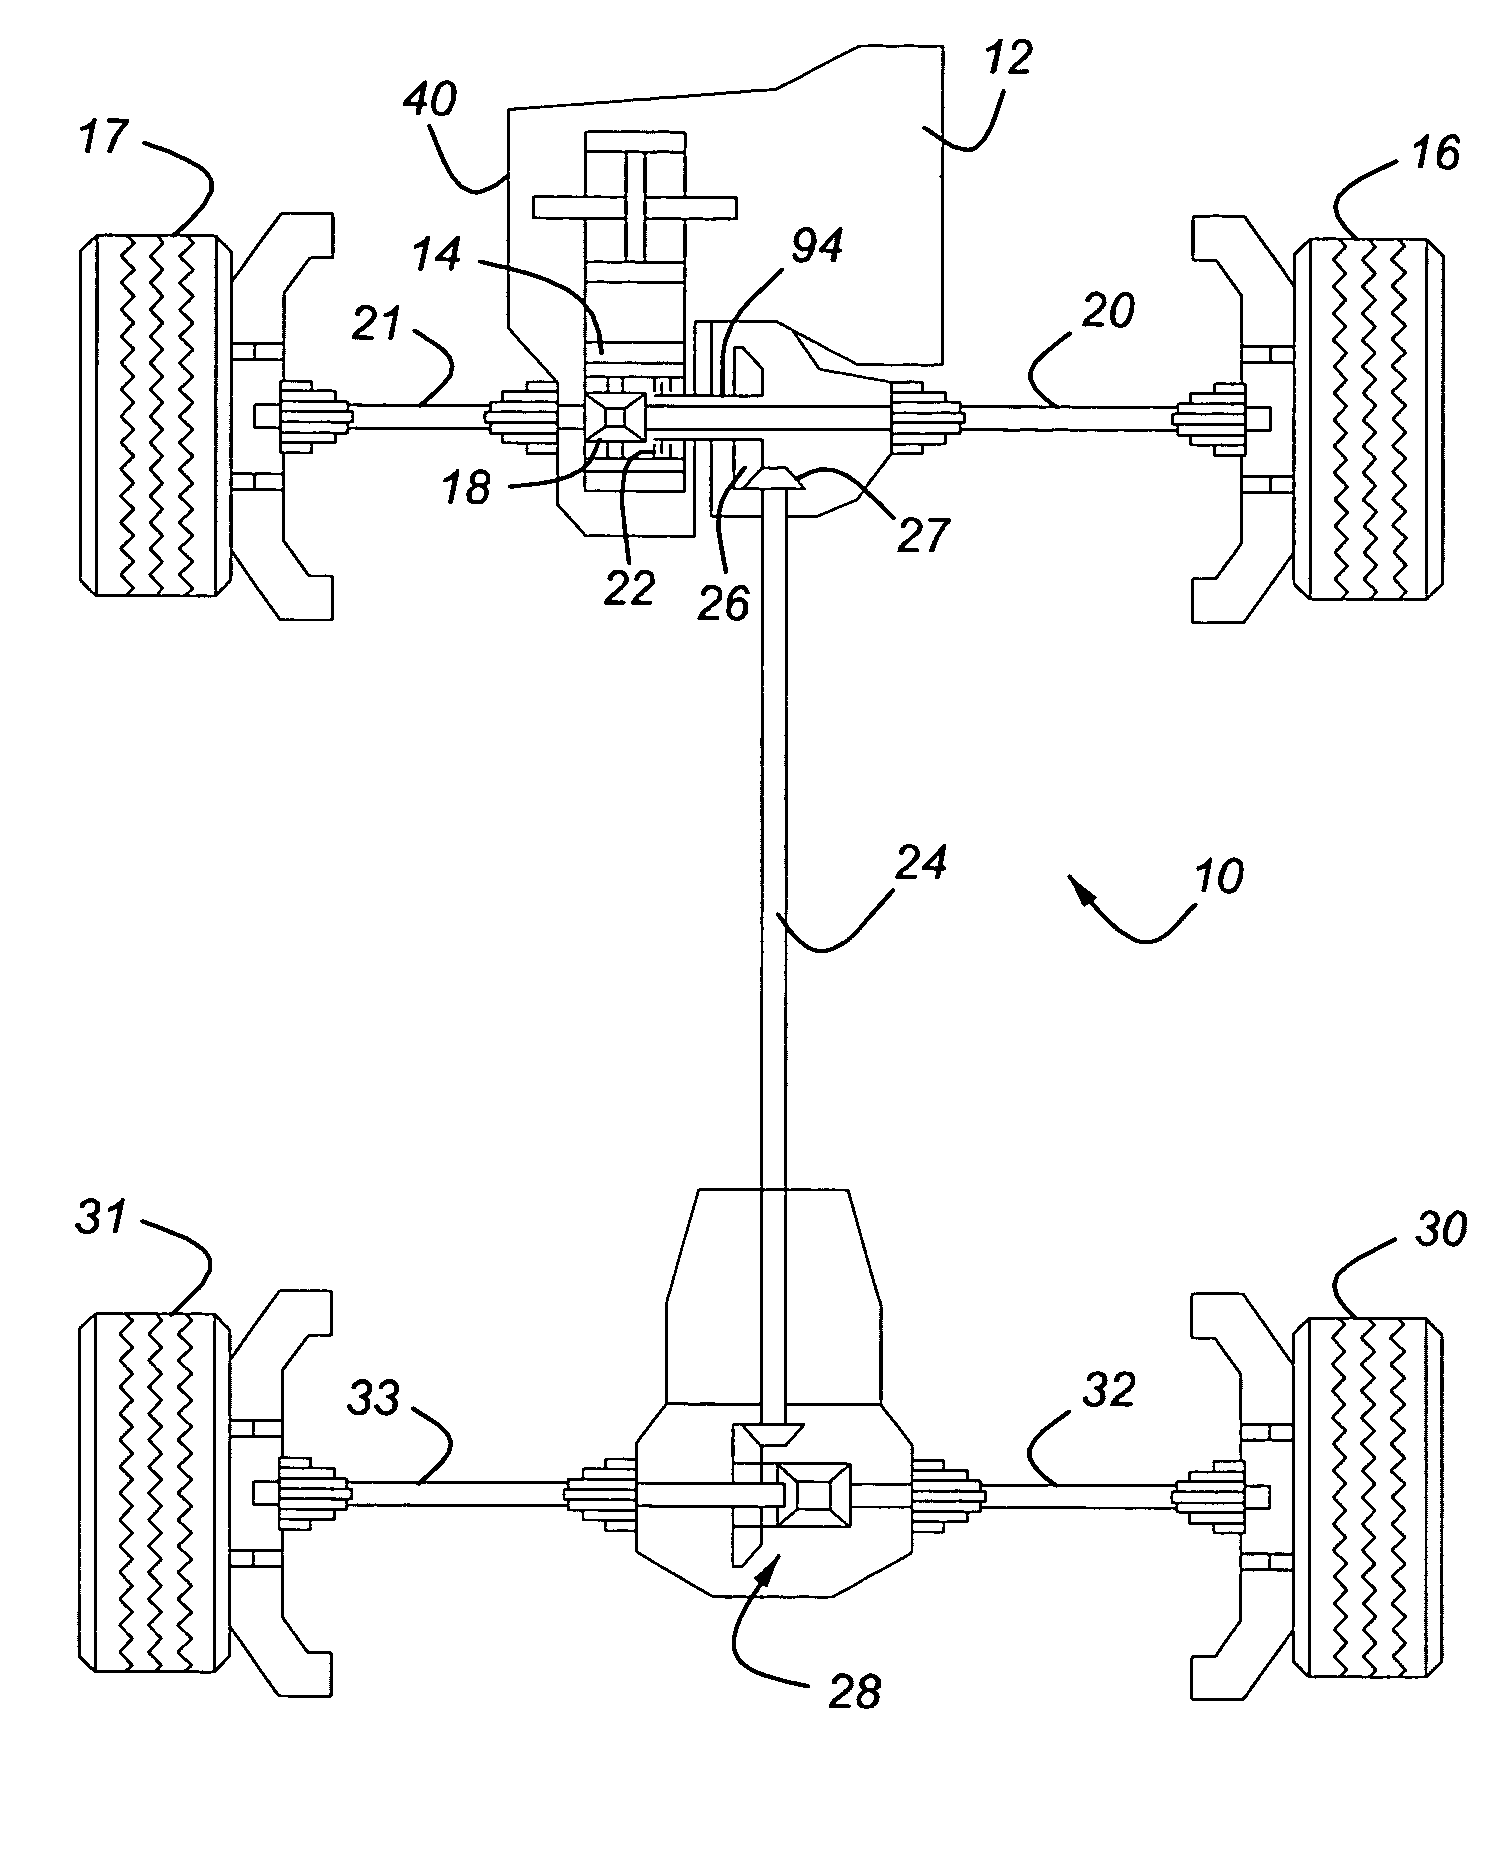 Transaxle having a differential mechanism and on-demand transfer clutch